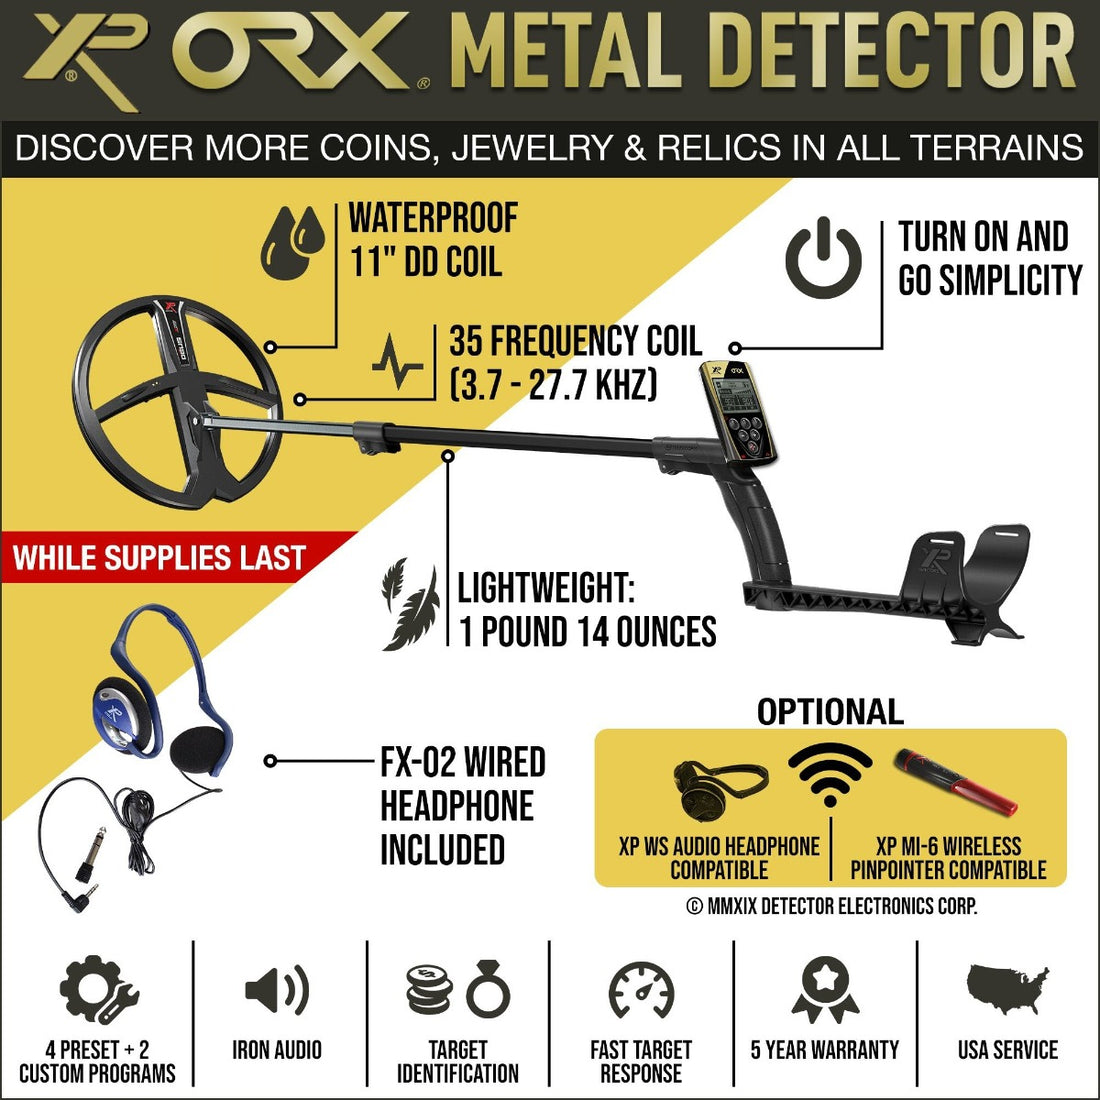 XP ORX Wireless Metal Detector with Back-lit Display + FX-02 Wired Backphone Headphones + 11" X35 Search Coil 